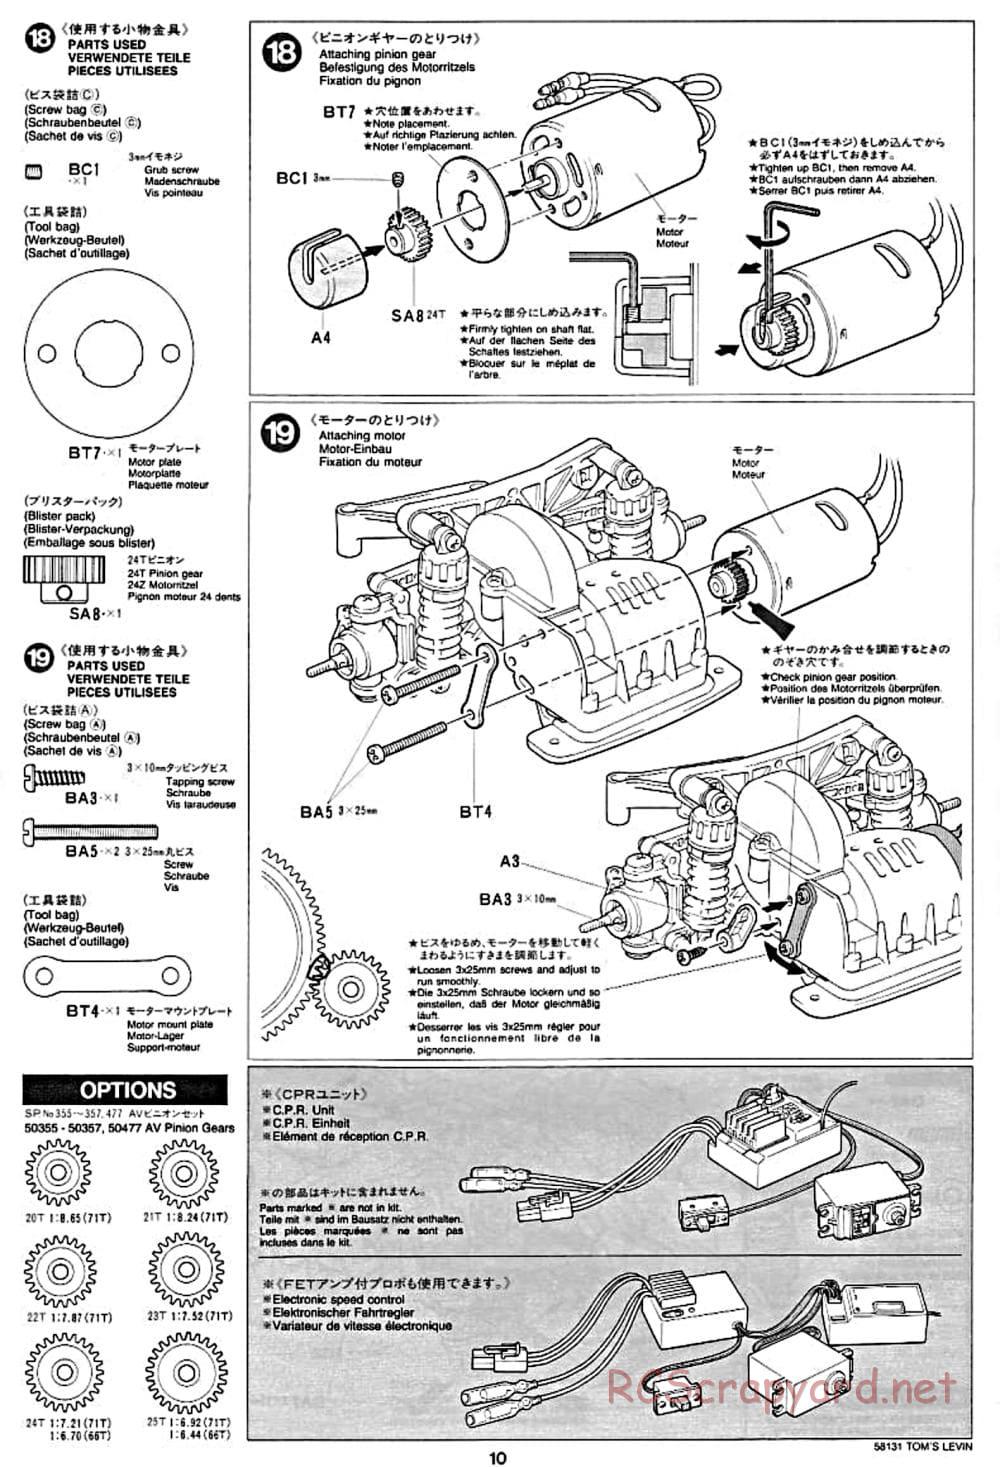 Tamiya - Toyota Tom's Levin - FF-01 Chassis - Manual - Page 10